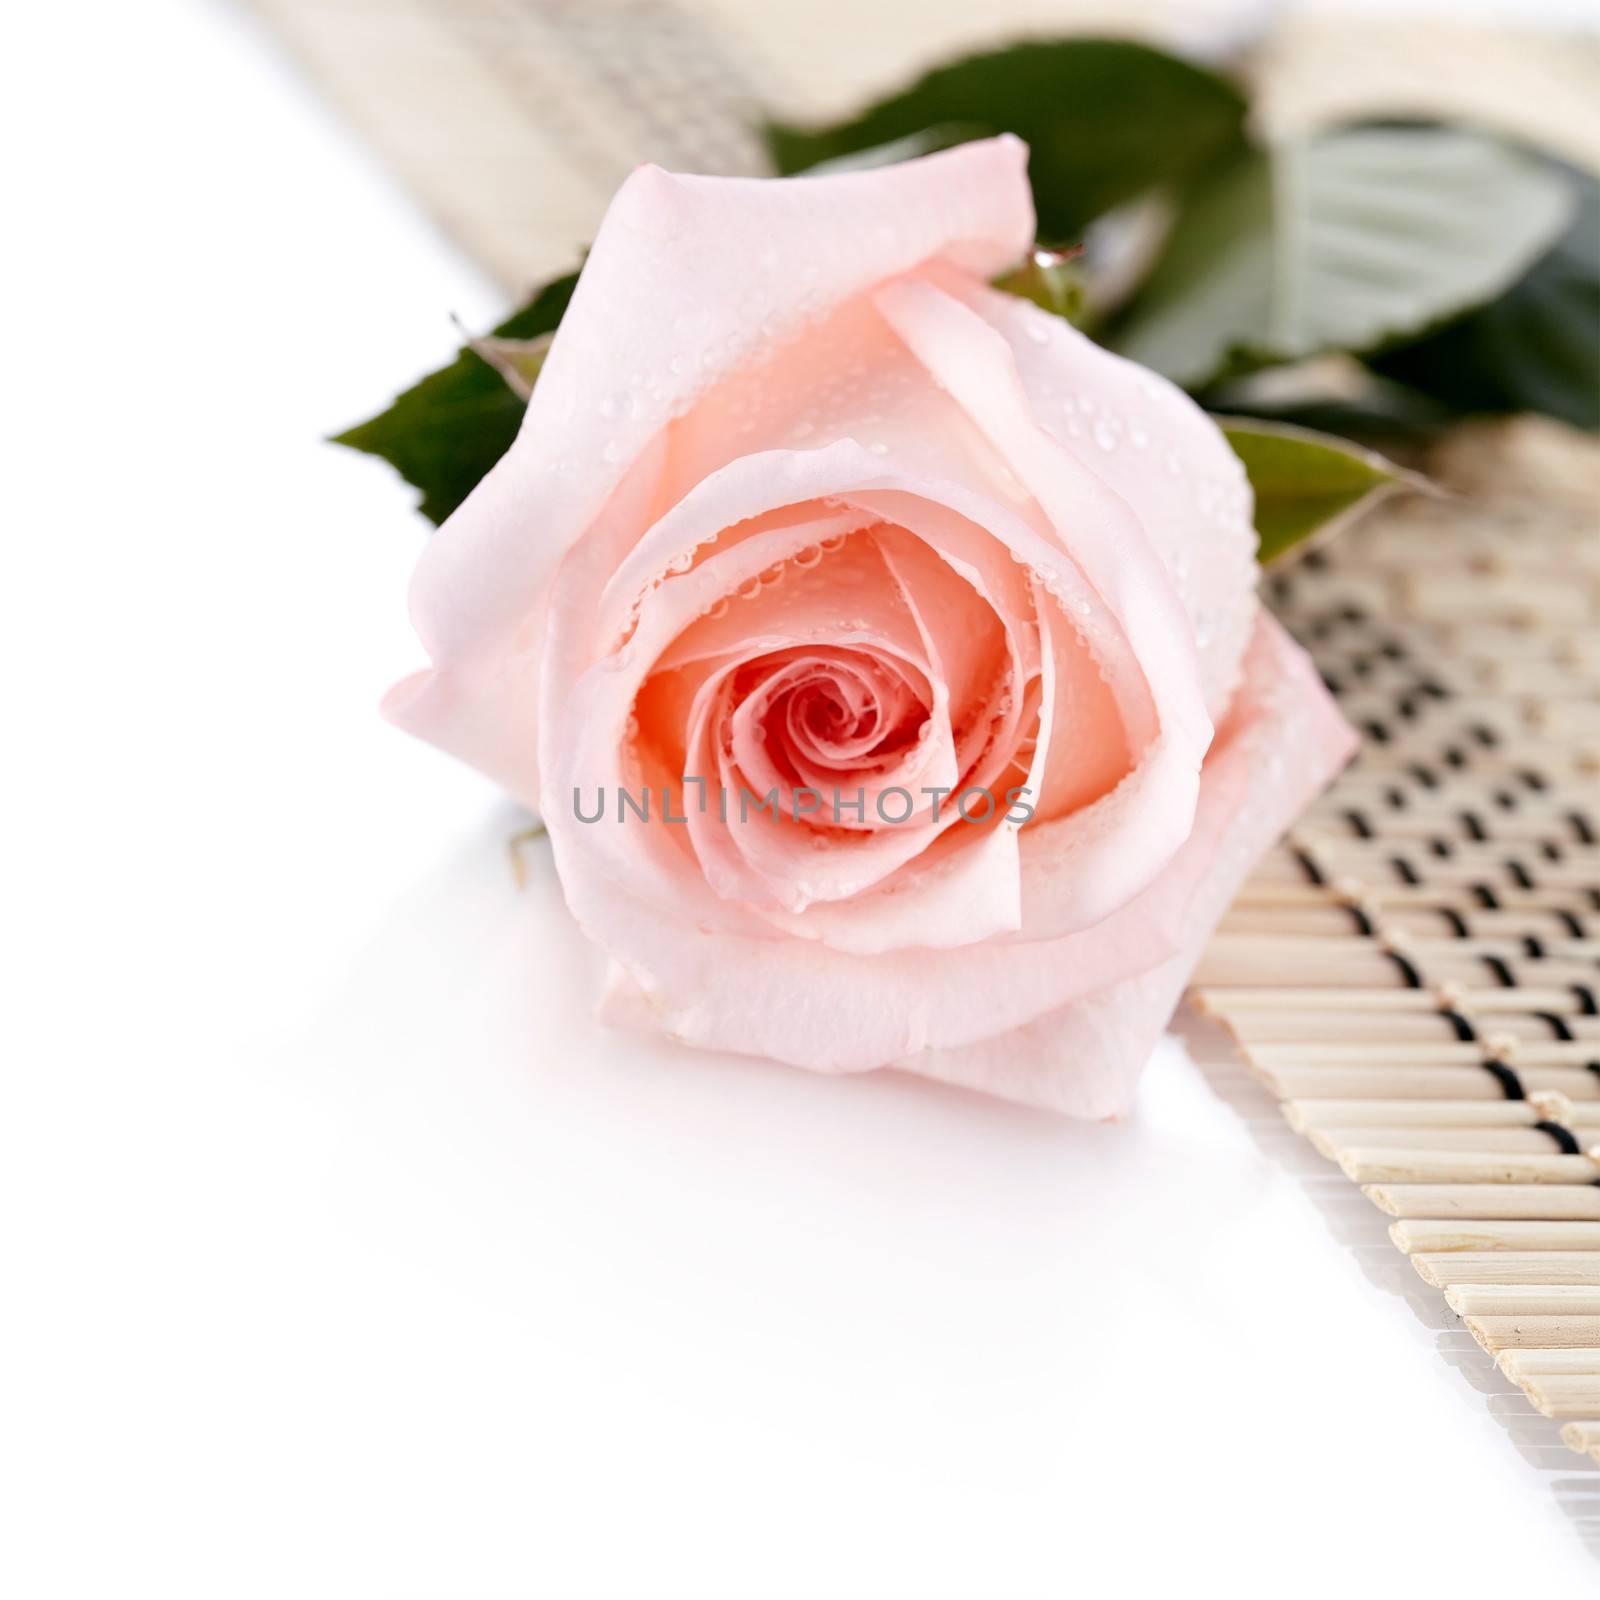 Beautiful pink rose. Pink rose. Rose on a white background. Pink flower. The pink rose lies on a napkin.